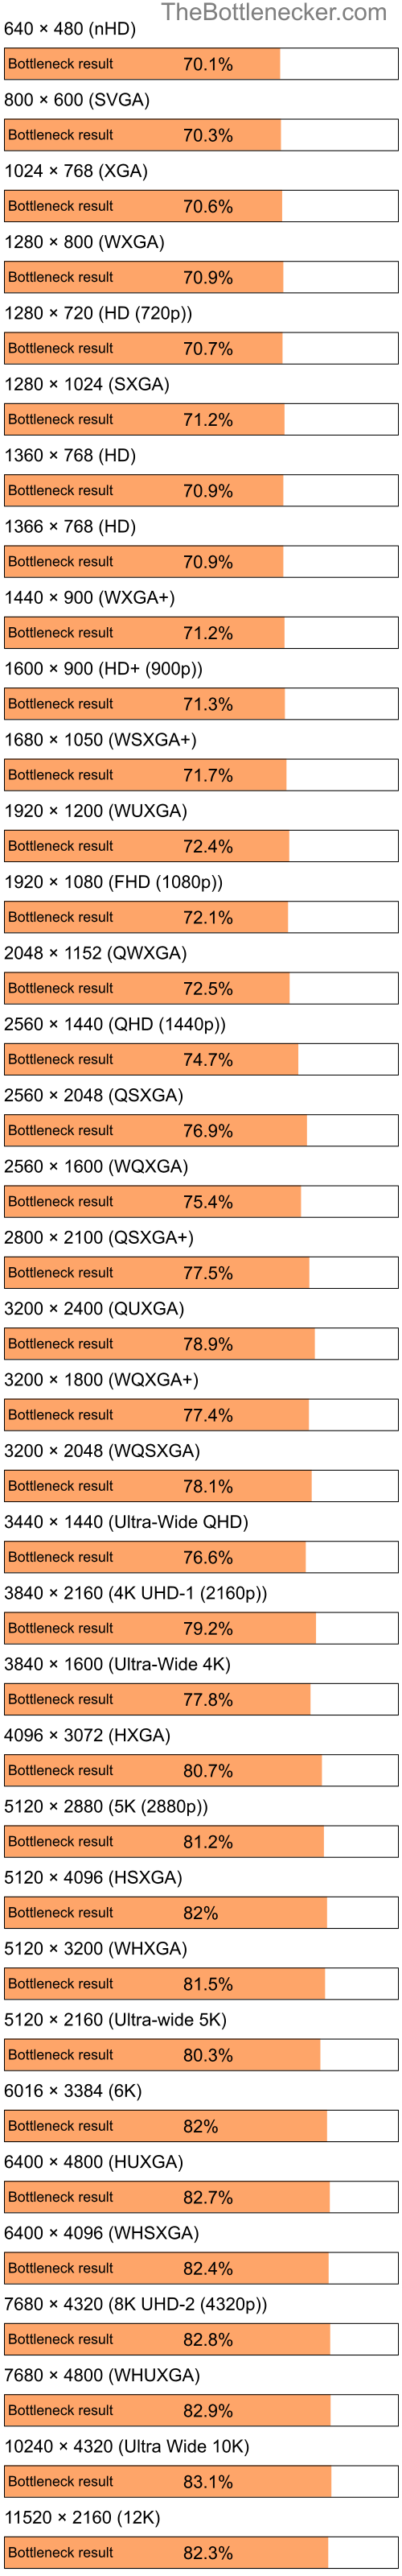 Bottleneck results by resolution for Intel Celeron M 410 and AMD Radeon X1300 in General Tasks